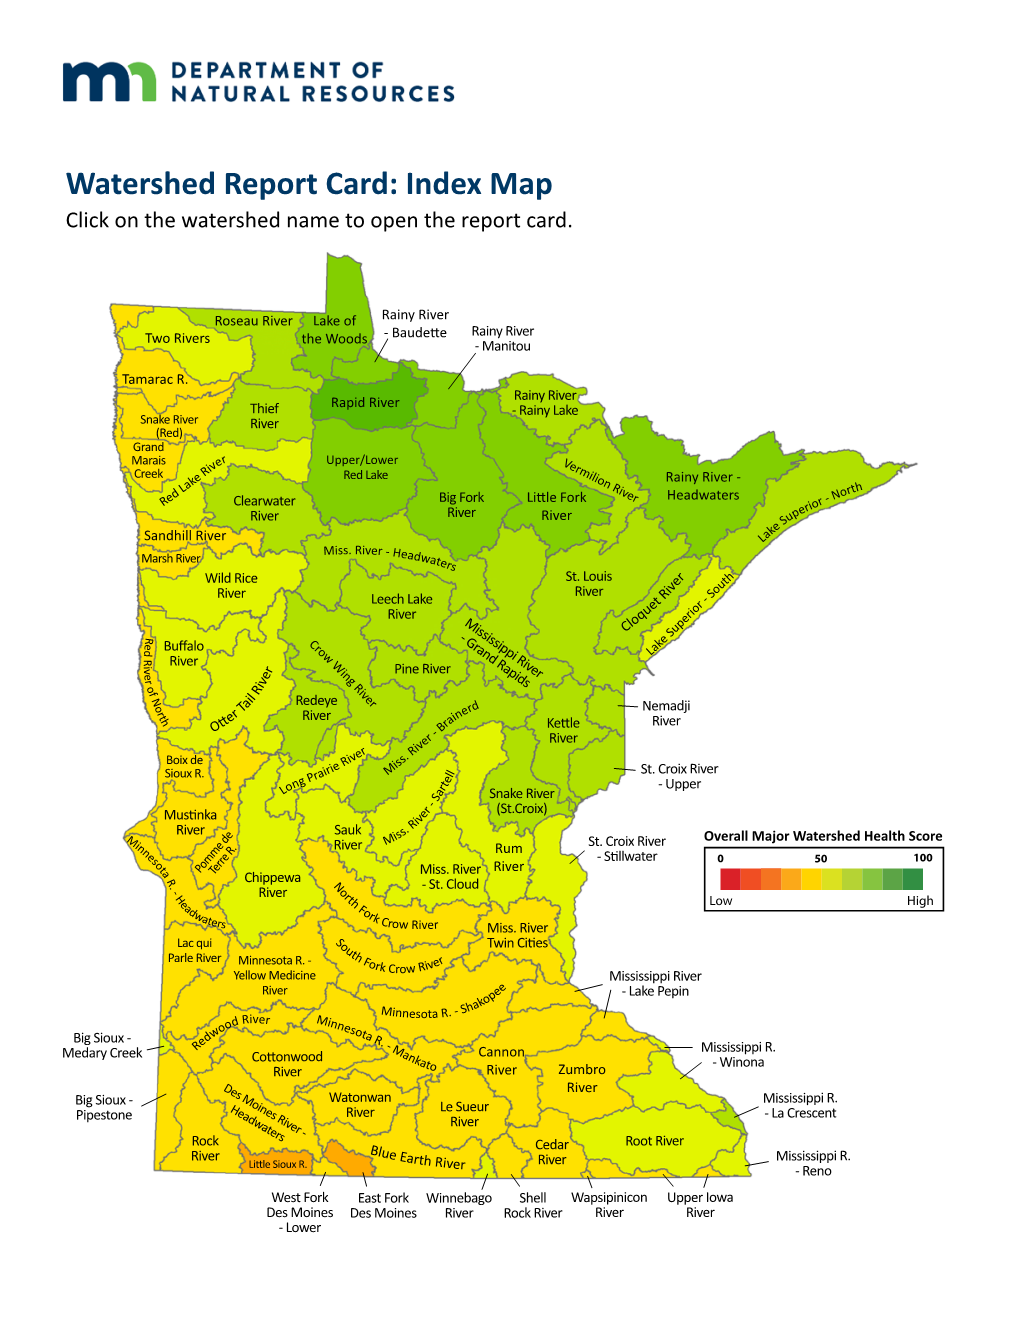 Watershed Health Report Card, Index